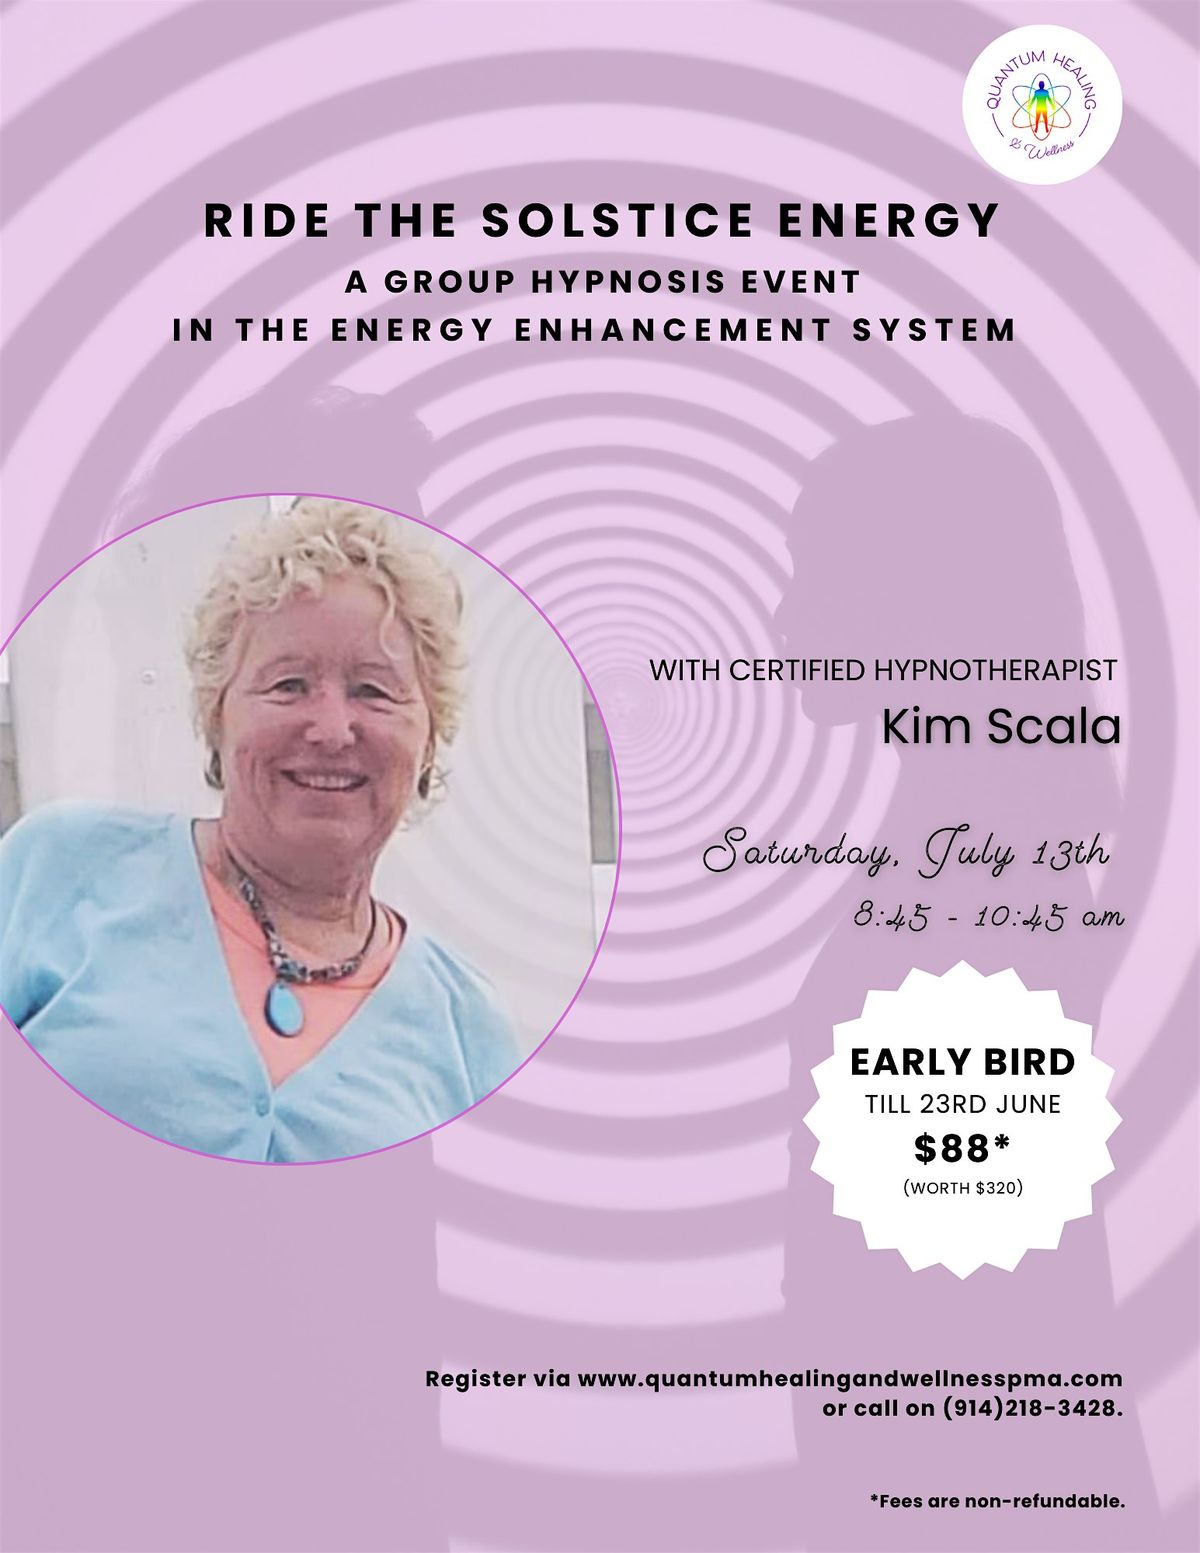 Ride The Solstice Energy - A Group Hypnosis Event with Kim Scala